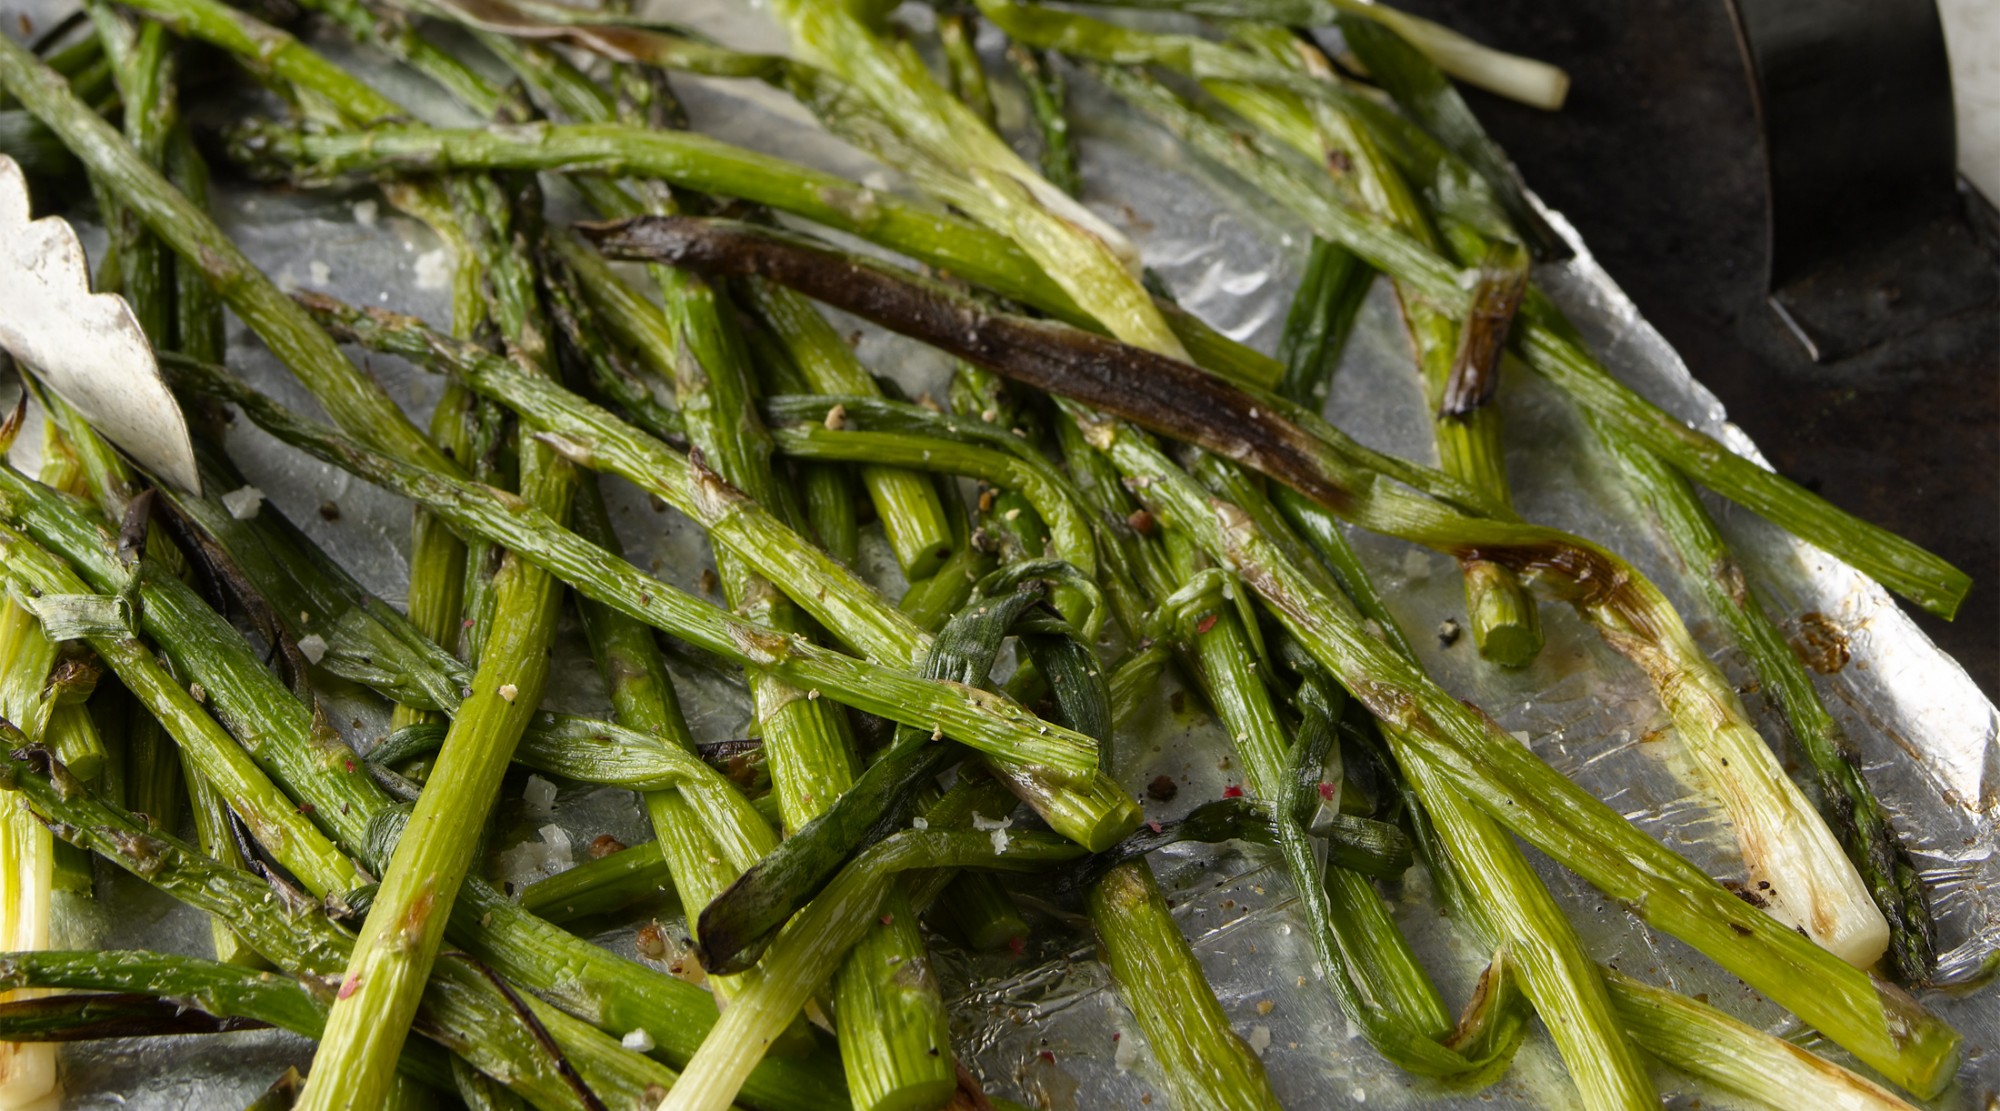 Grilled Asparagus and Spring Onions | The Splendid Table